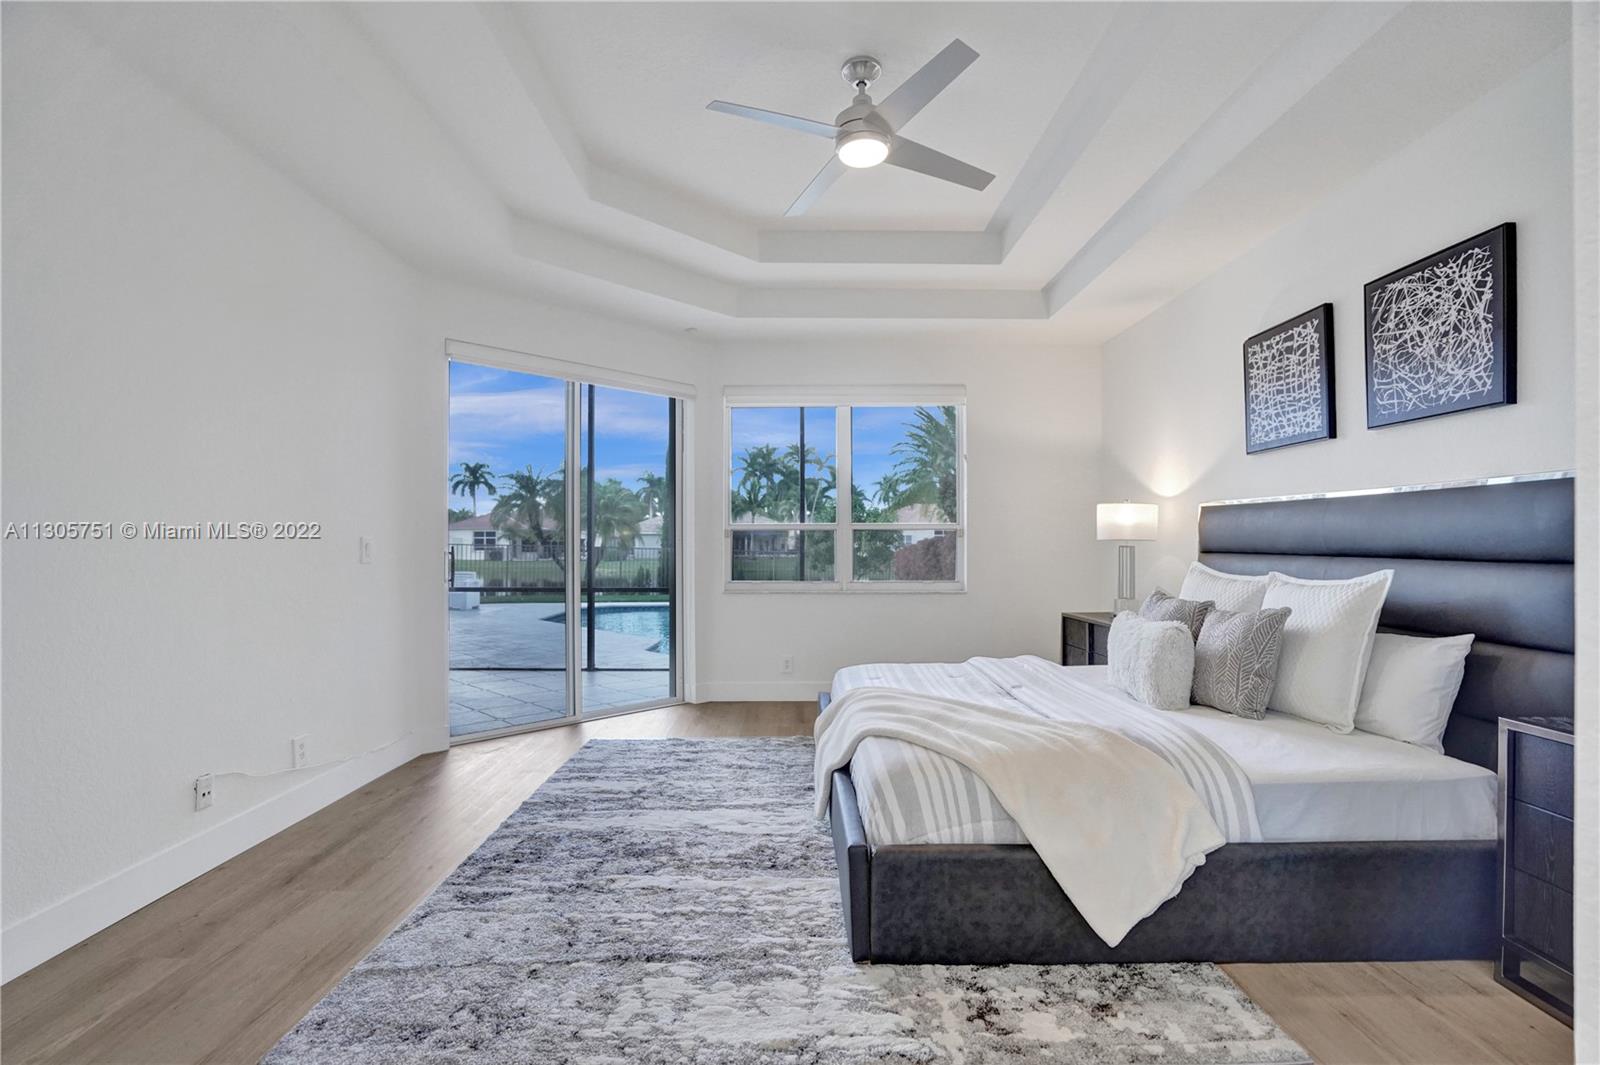 Freshly painted master suite with double coffered ceiling, modern ceiling fan, brand new luxury vinyl plank flooring, new high baseboards and amazing views!